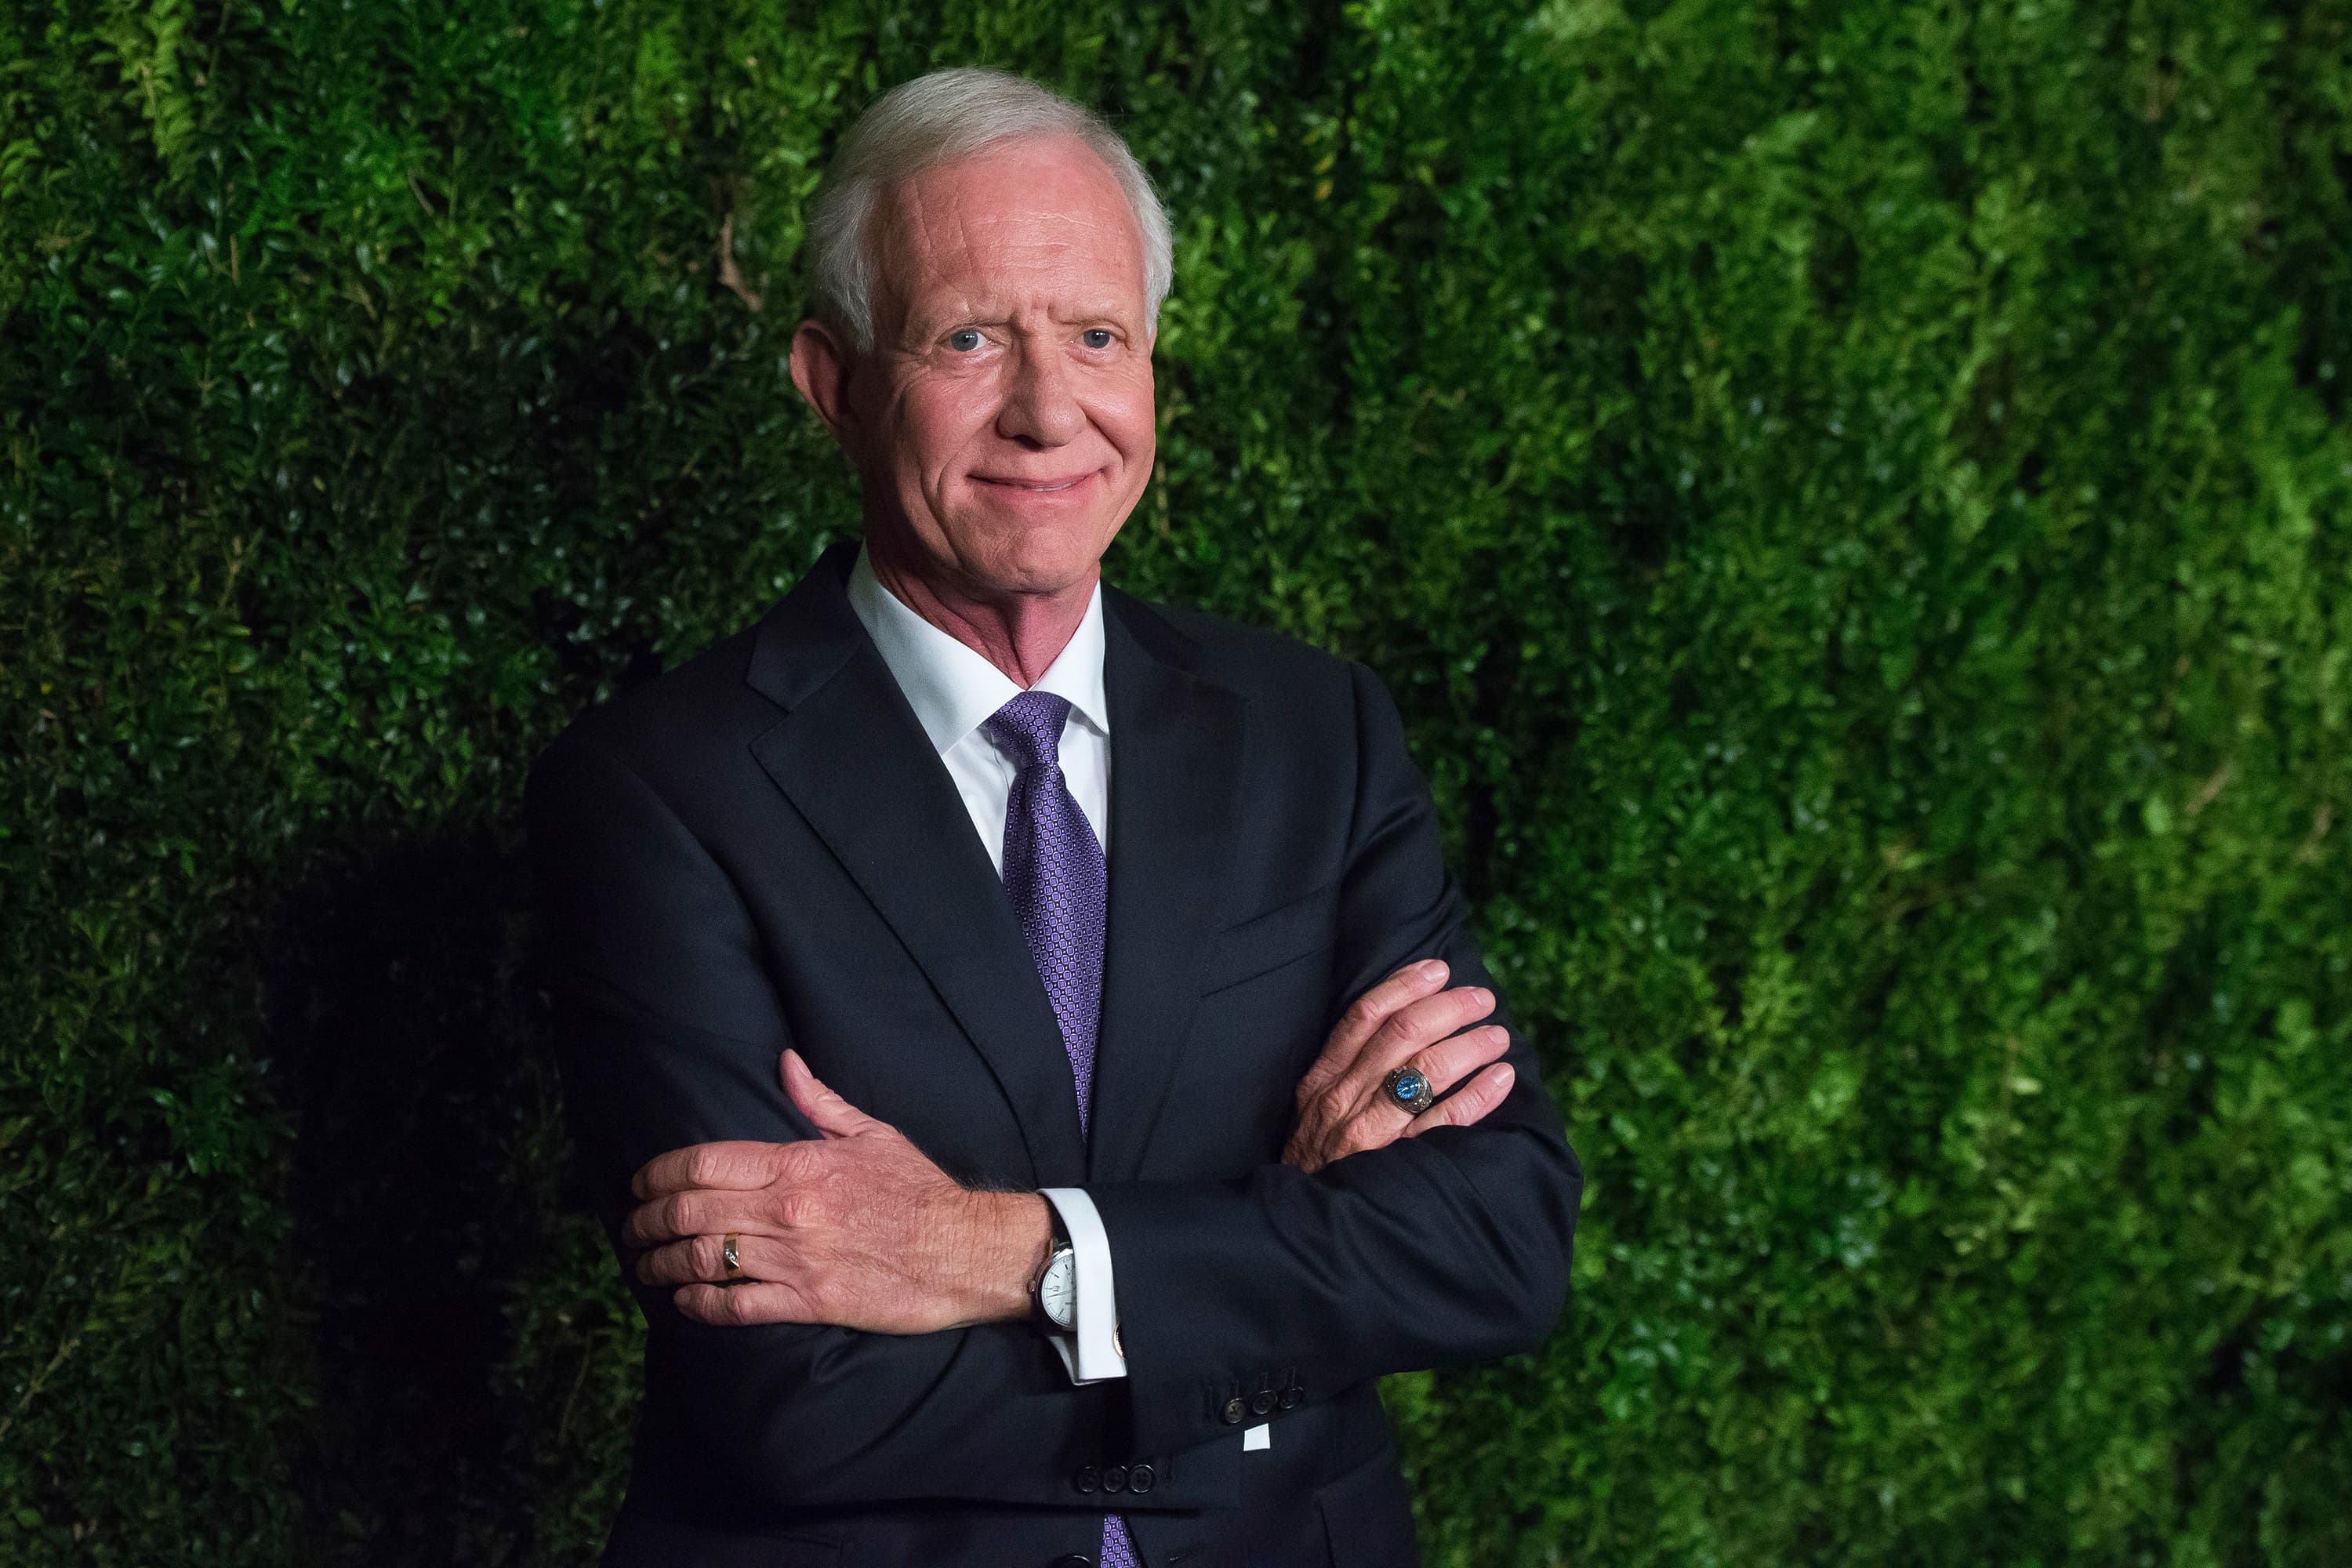 Chesley "Sully" Sullenberger